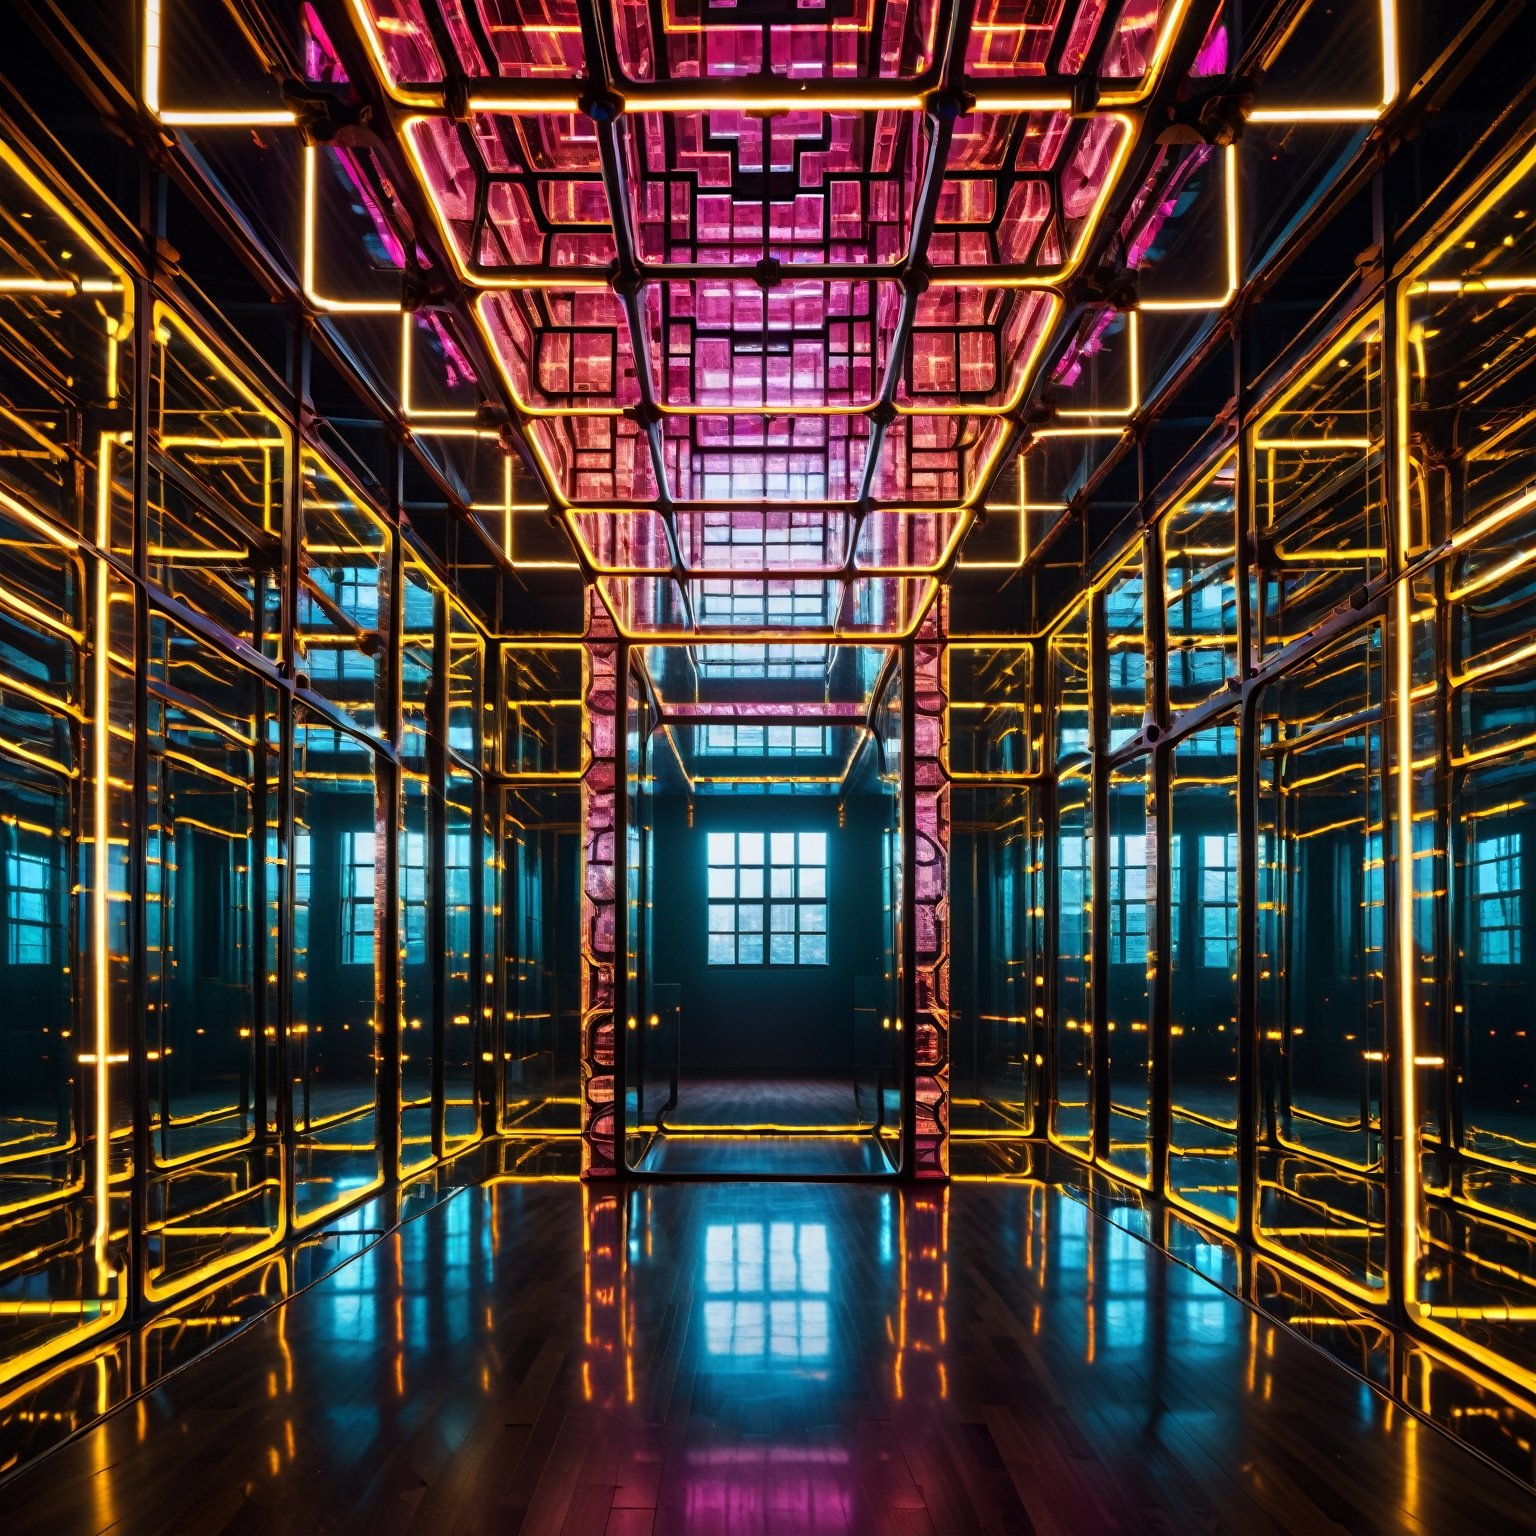 Imagine a minimalist room where the focal point is strategically positioned mirrors that reflect each other. At the center of this chamber stands a glowing neon cube, encircled by the mirrors arranged in intricate patterns.
reflective surfaces, creates a kaleidoscopic effect, engaged in a play of perspectives and realities. dramatic light